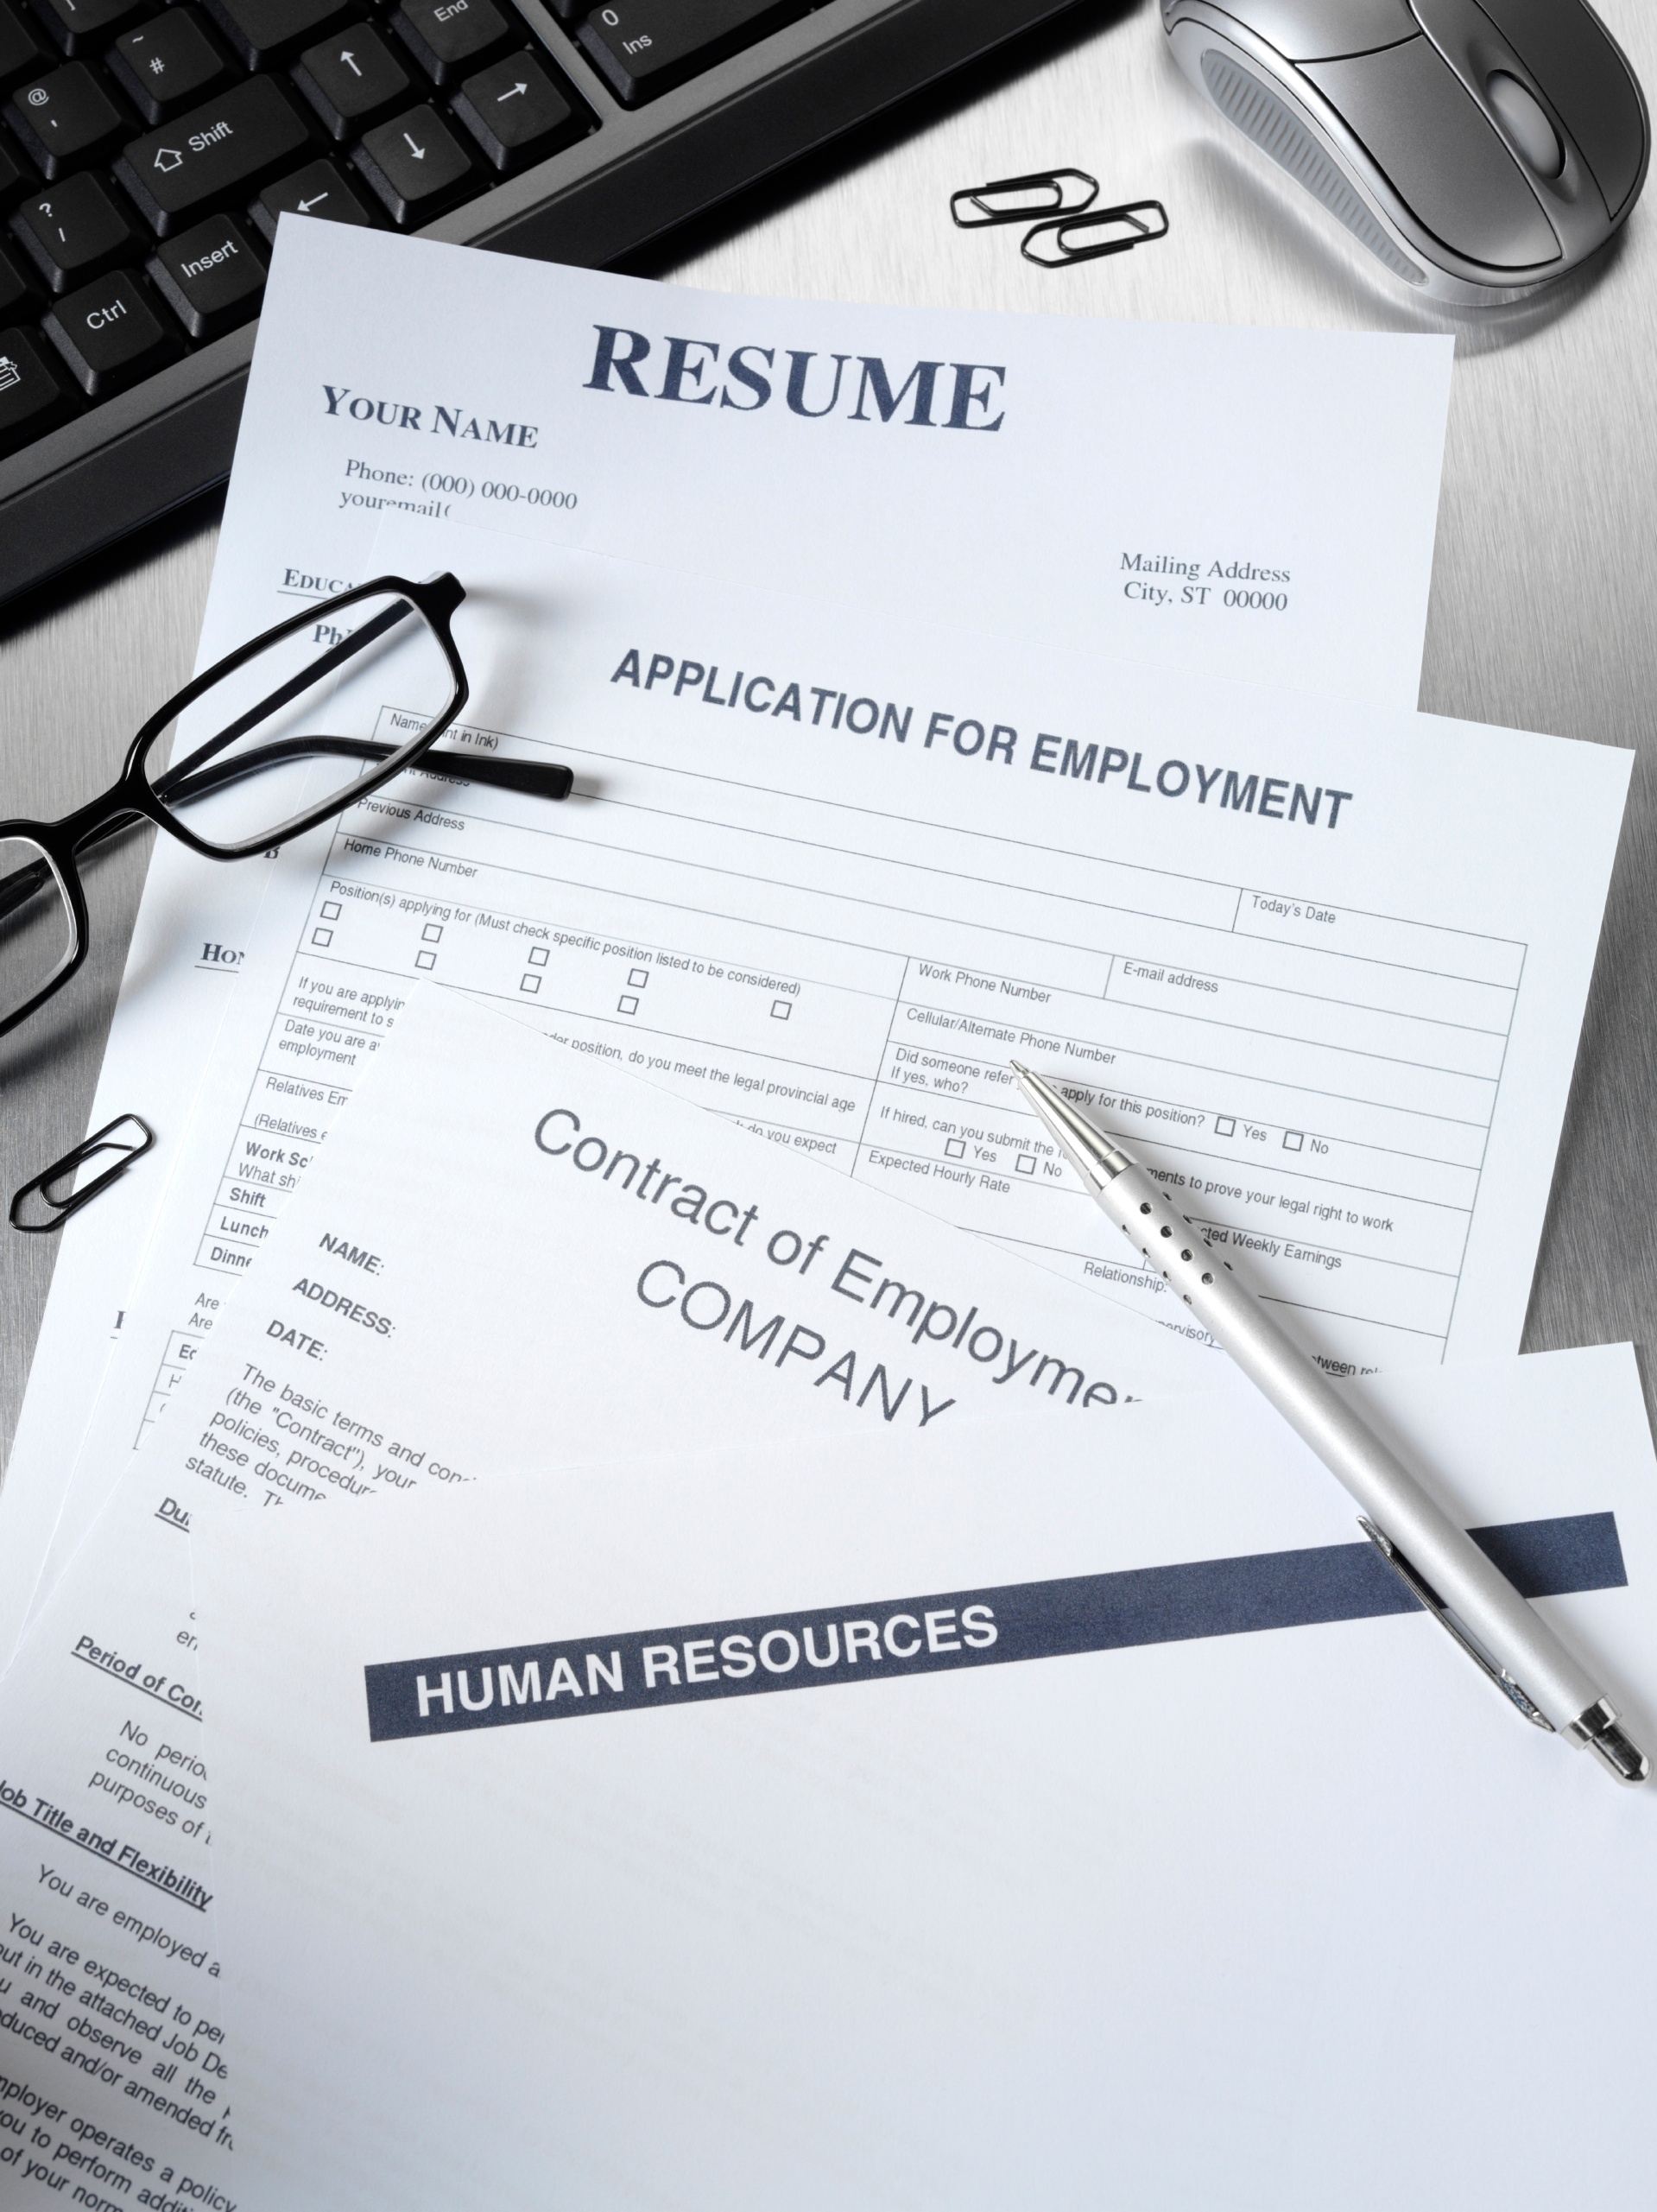 Here are a few things your facilities management resume needs to be top of the stack.